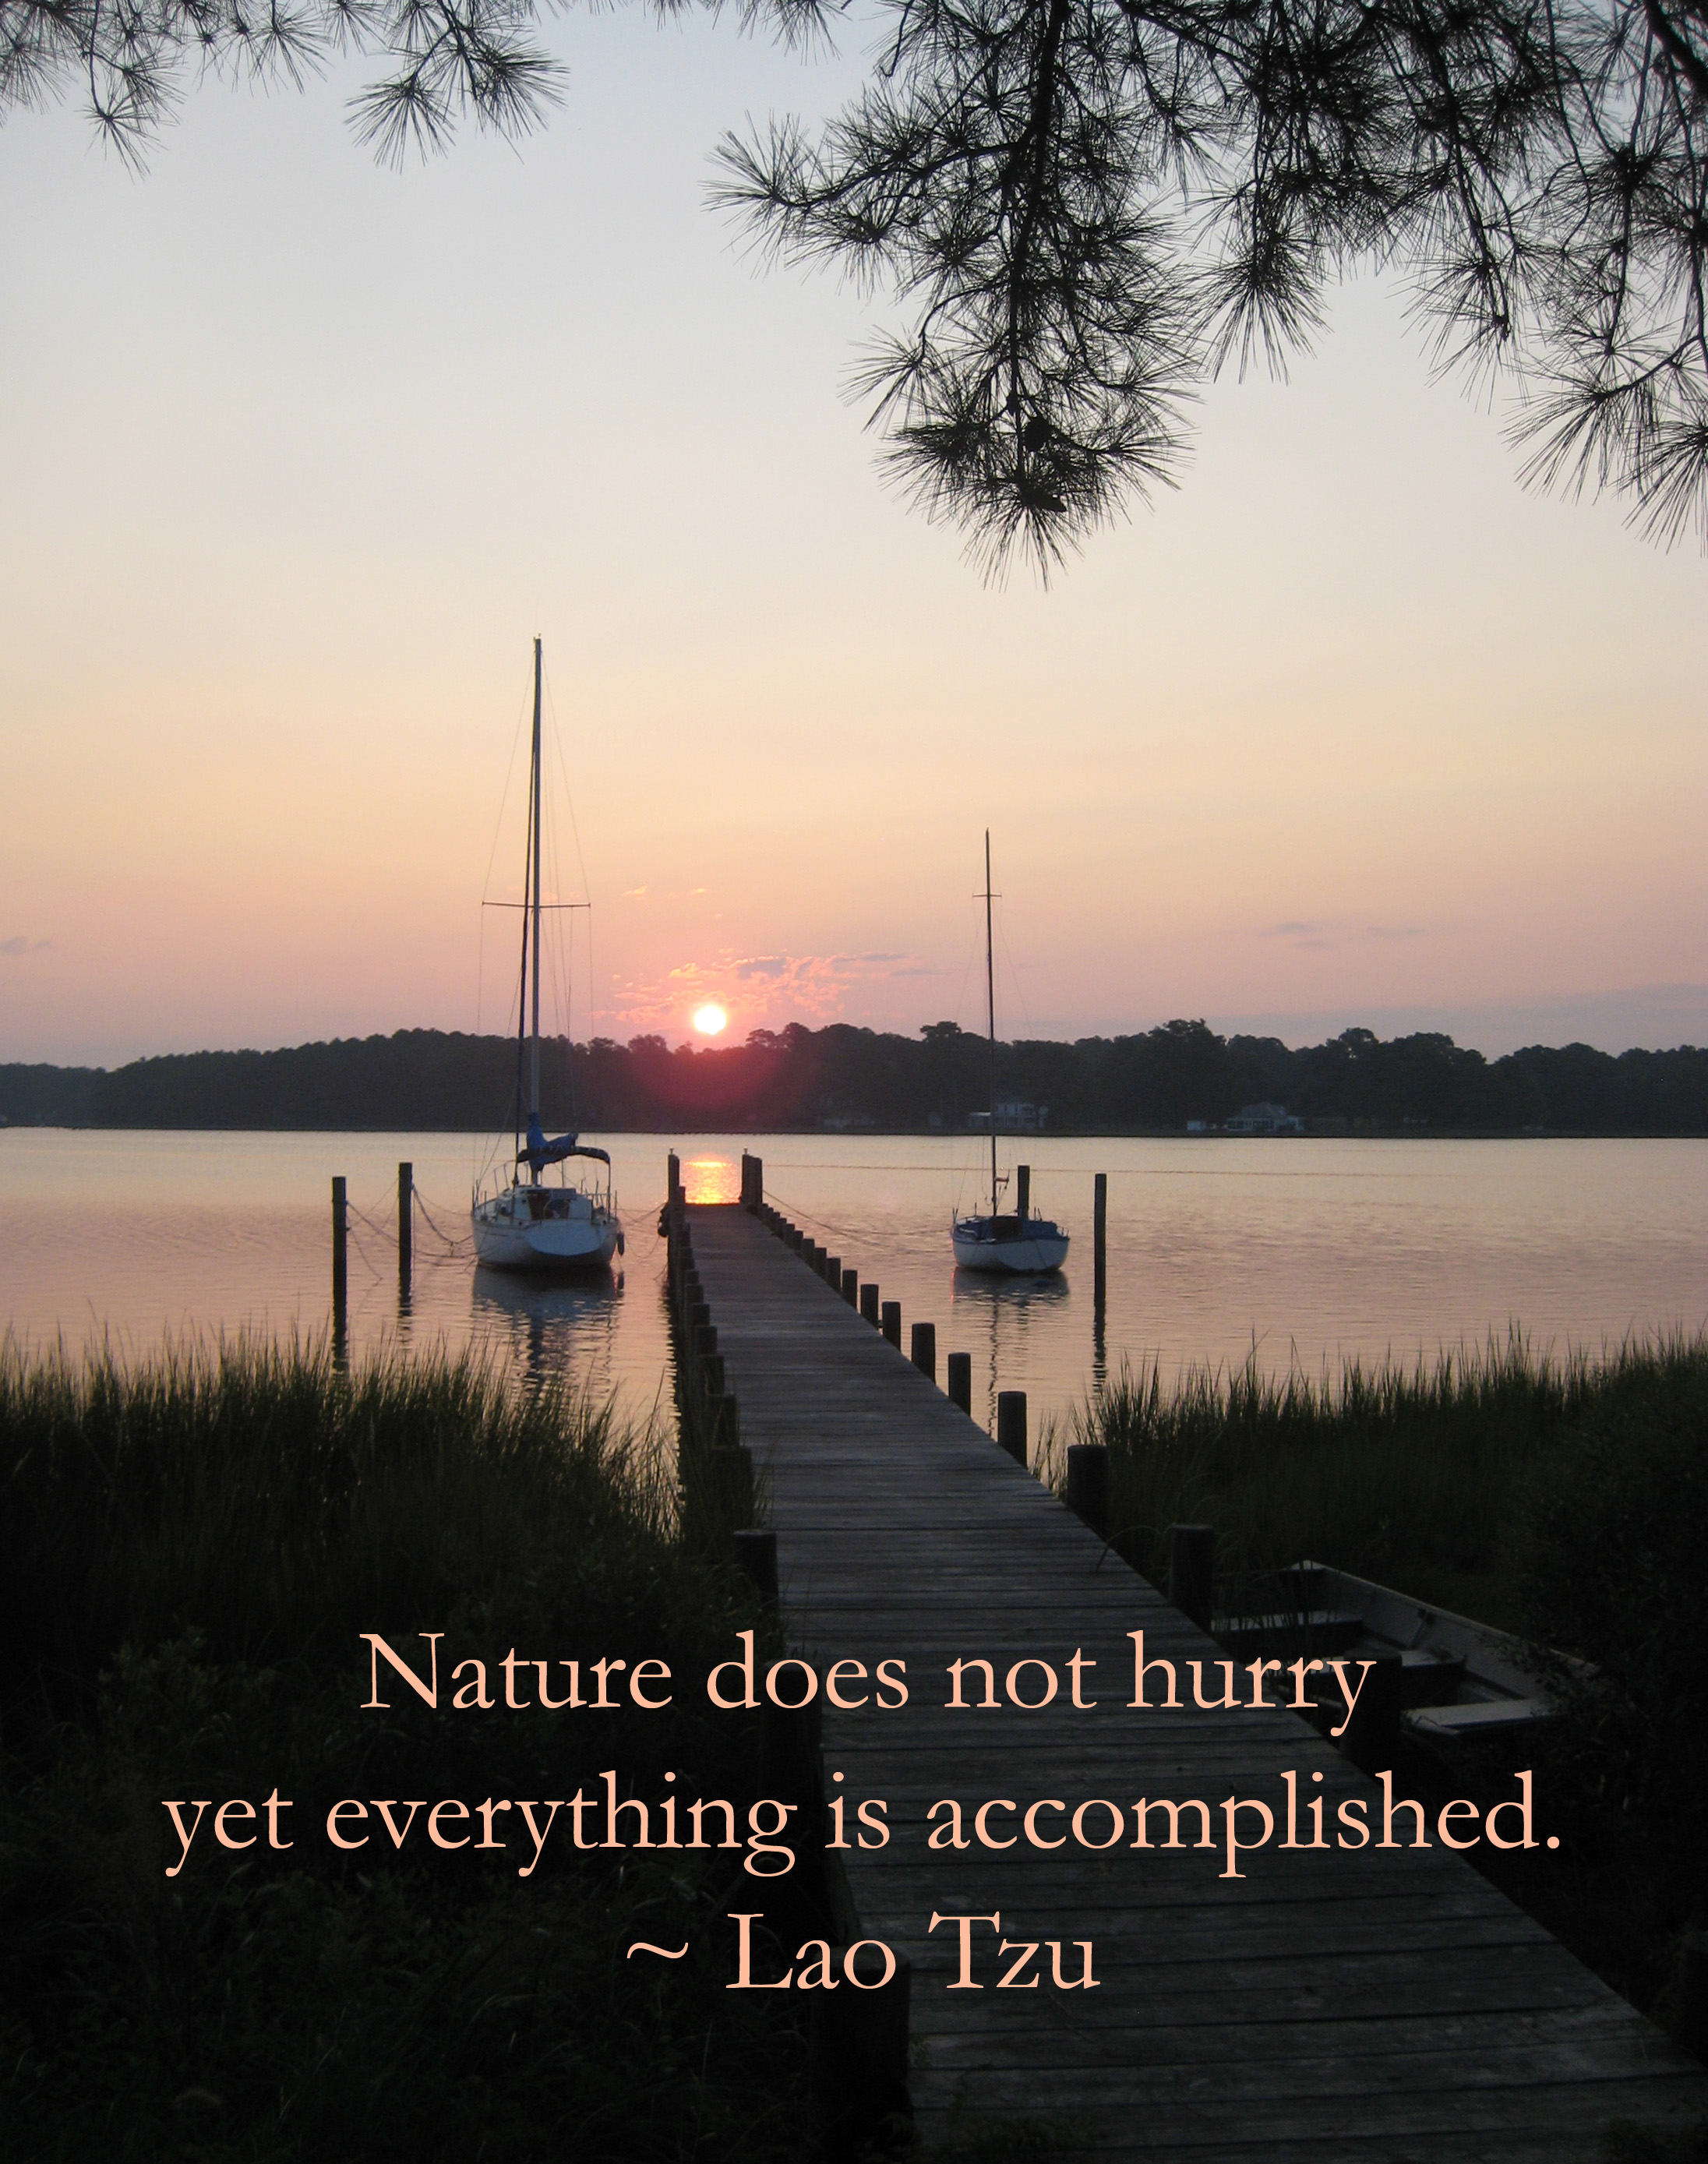 Carol Chapman- Inspirational quote about nature from Lao Tzu